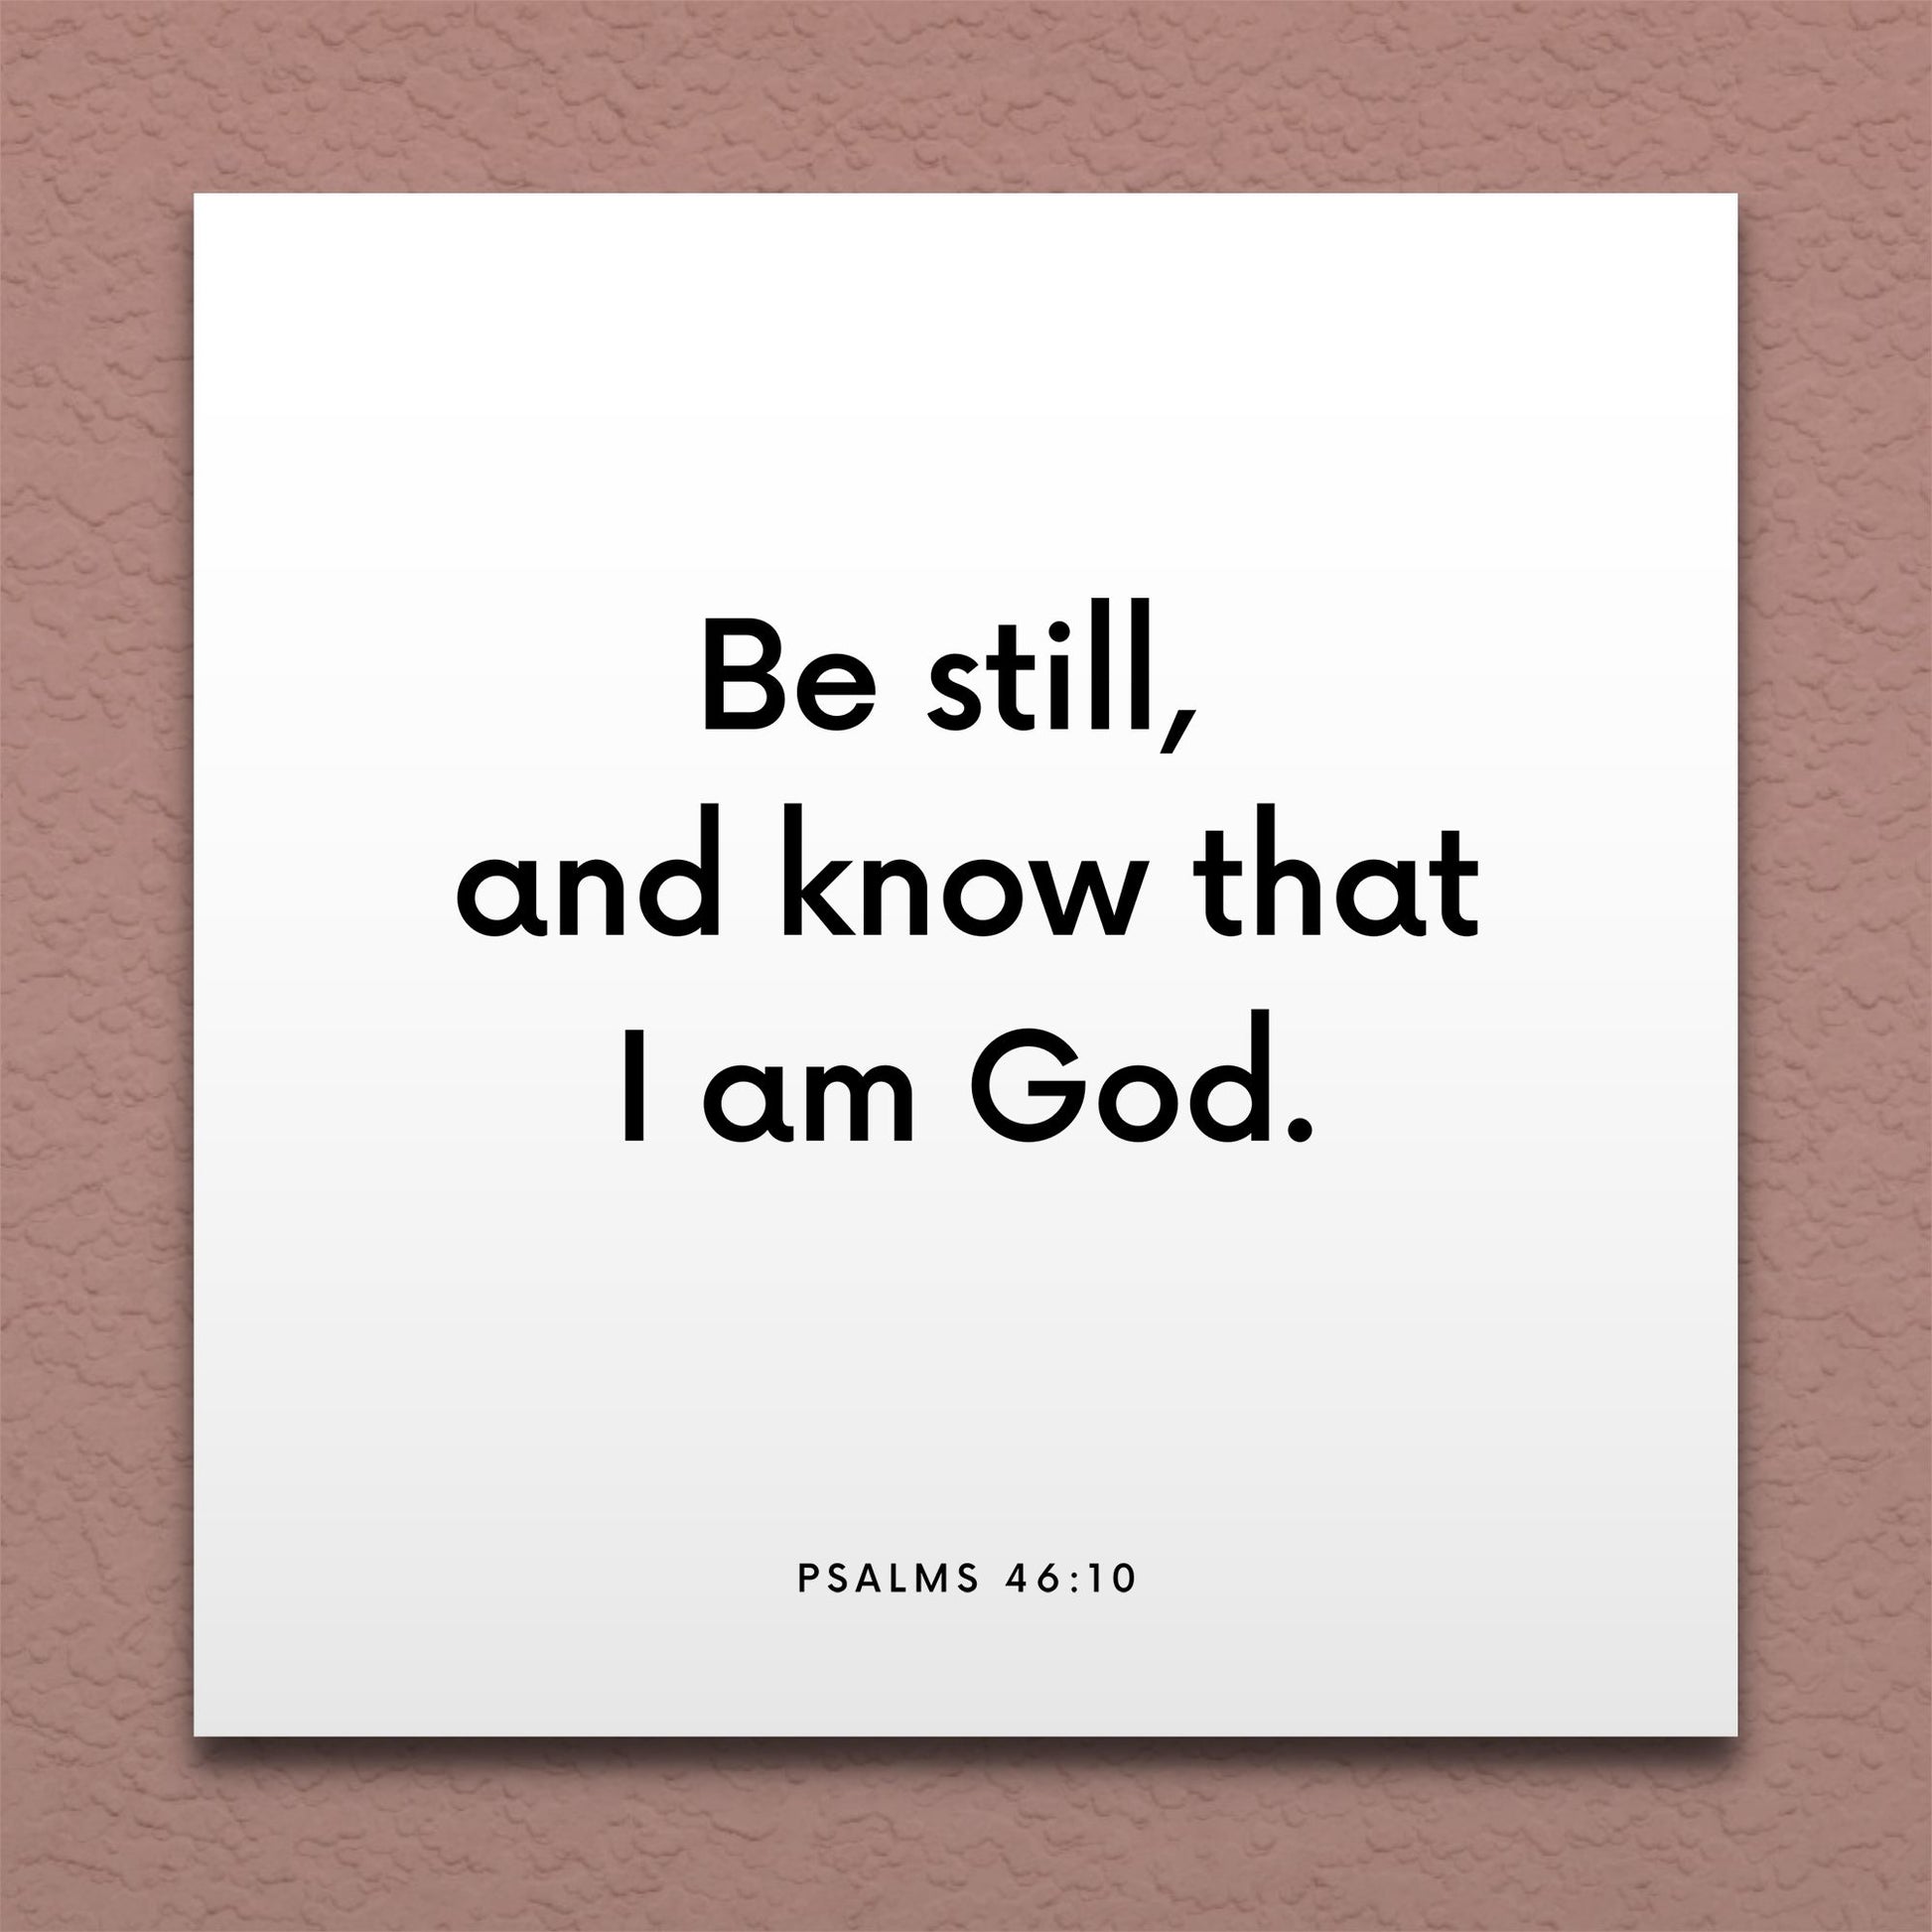 Wall-mounted scripture tile for Psalms 46:10 - "Be still, and know that I am God"